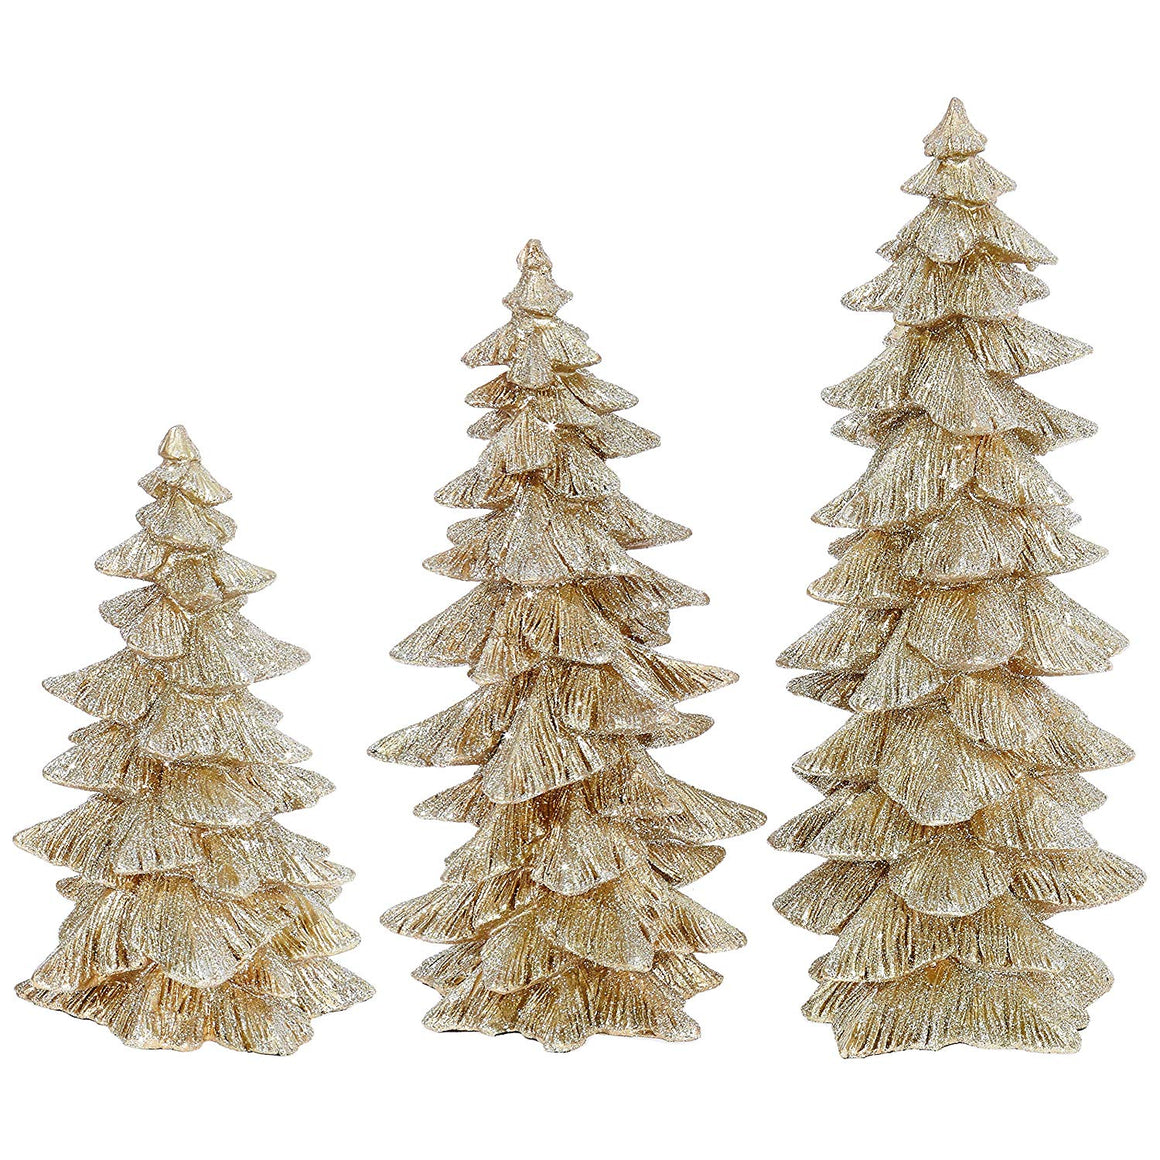 Set of 3 Champagne Gold Glittered Christmas Trees- 6.5 inches to 9.5 inches Tall